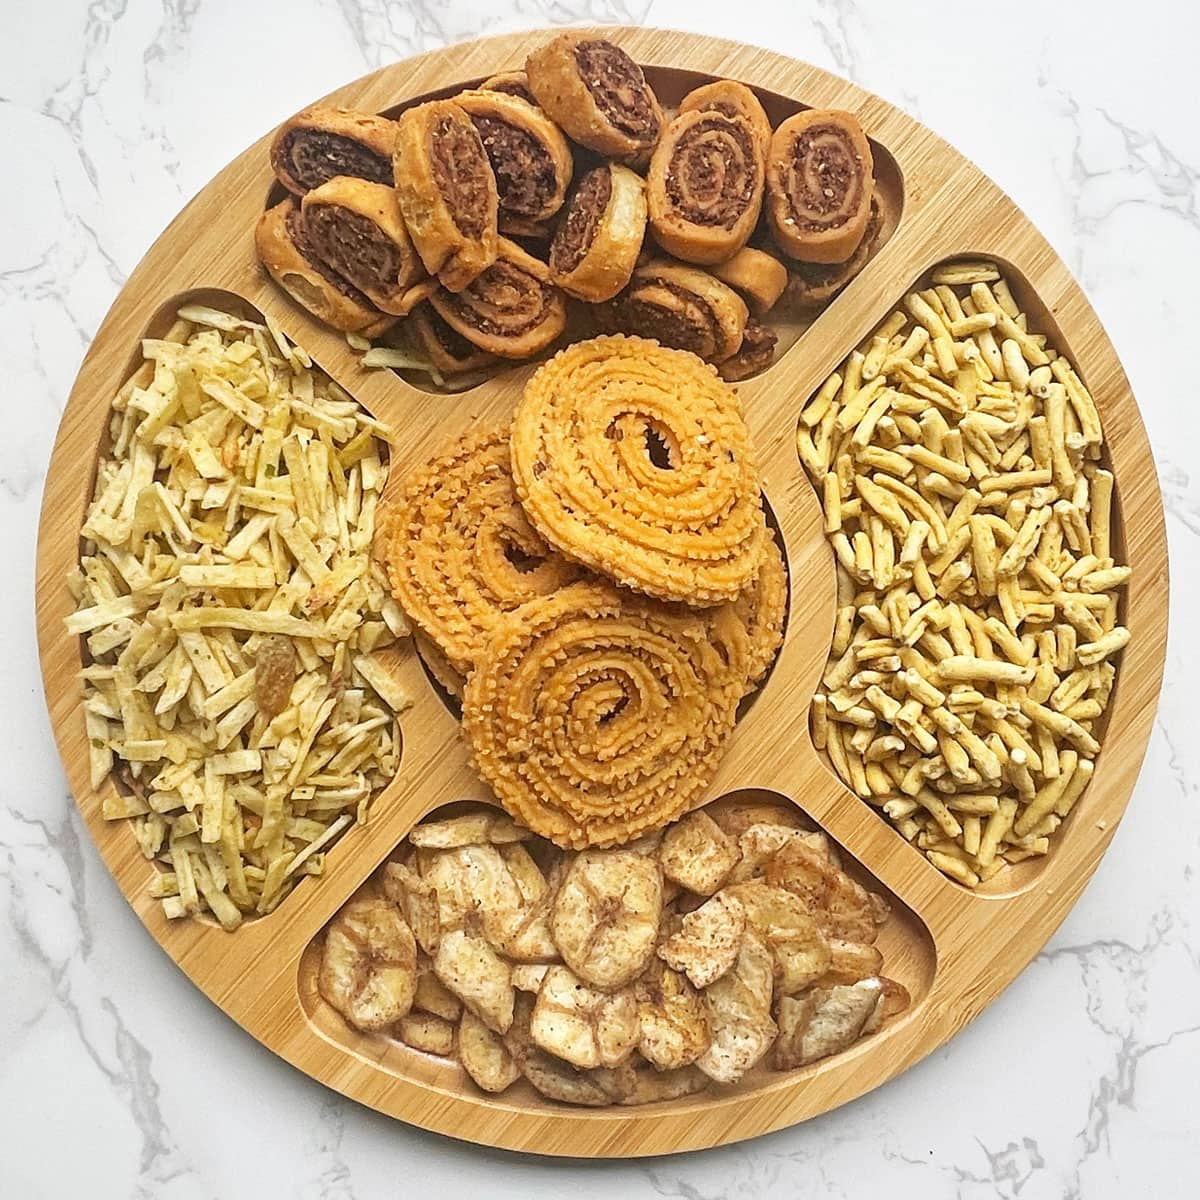 Indian savory snacks in a platter.